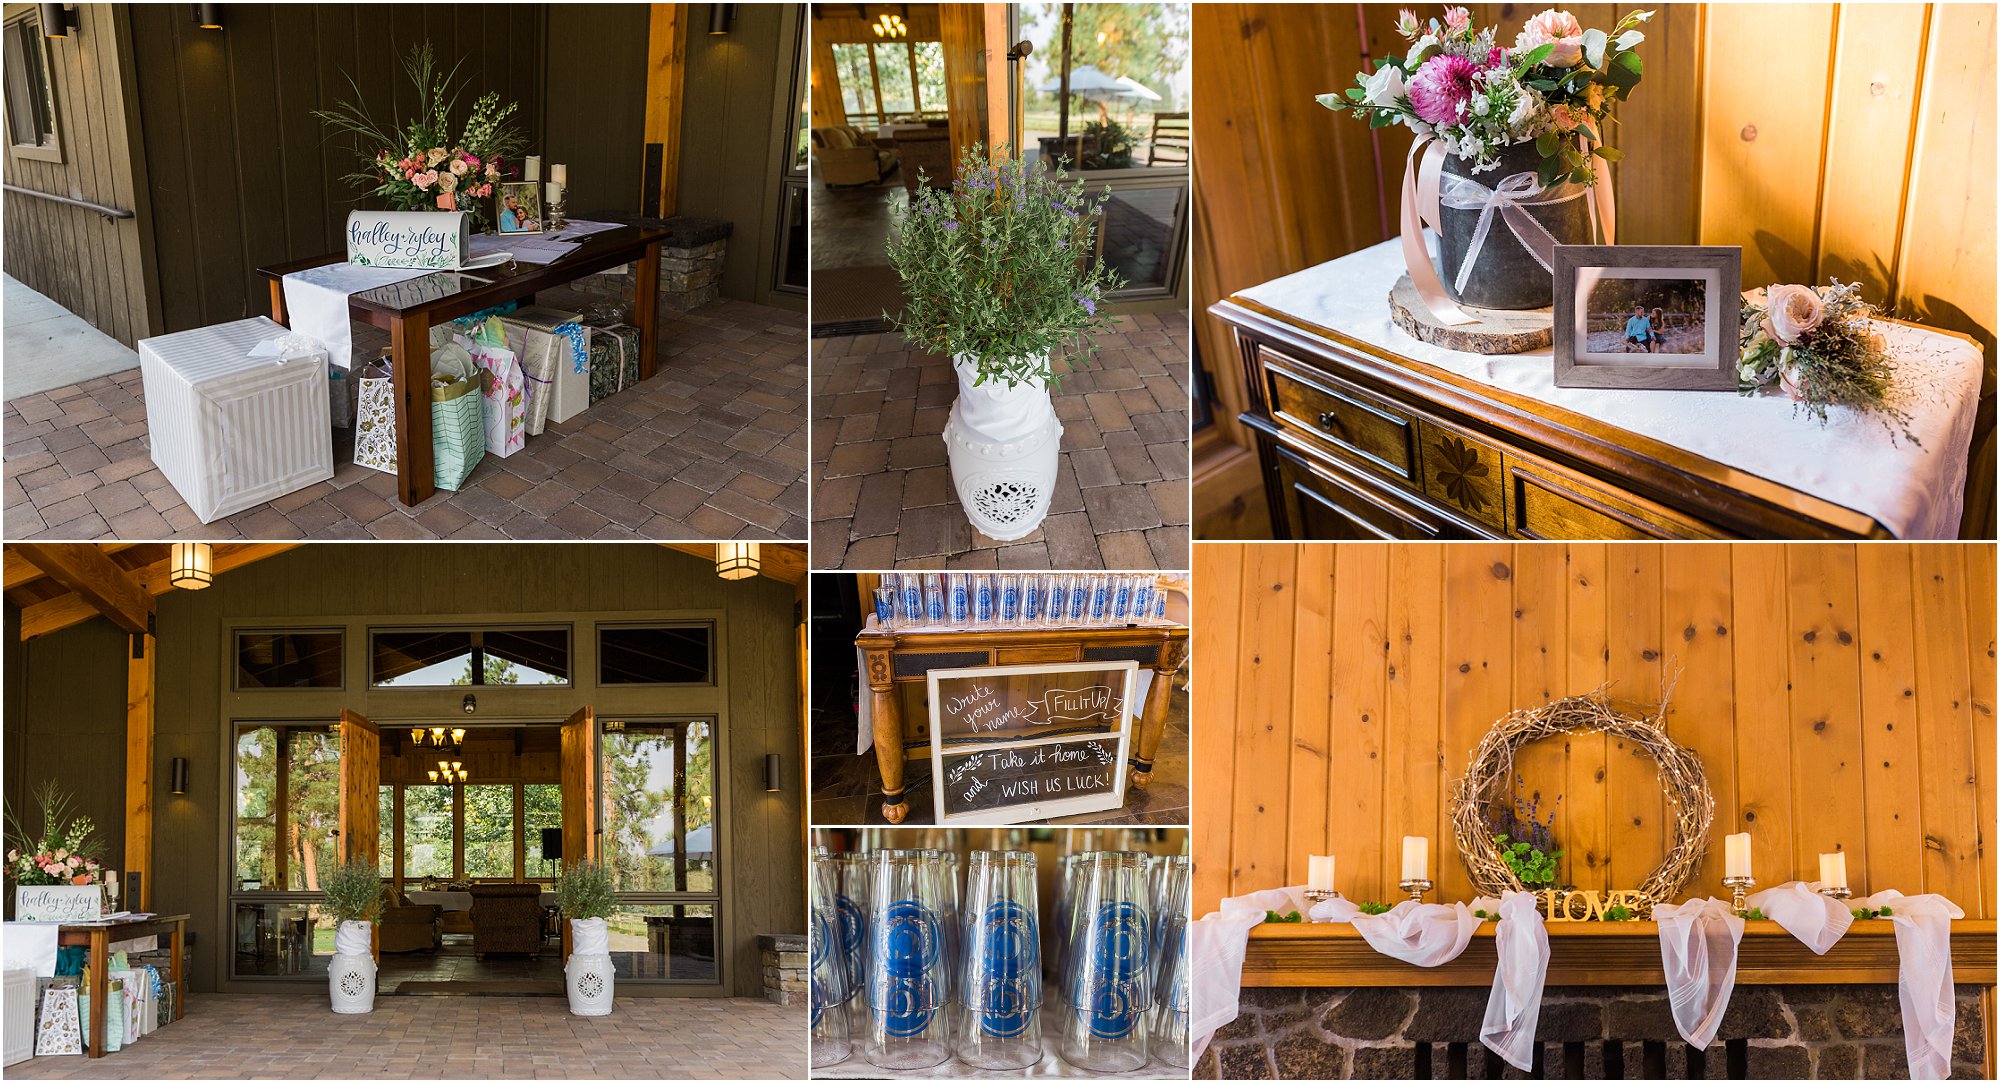 The Rock Springs Ranch wedding venue in Bend, OR was transformed into a California vineyard theme for this rustic outdoor wedding photographed by Bend wedding photographer Erica Swantek Photography. 